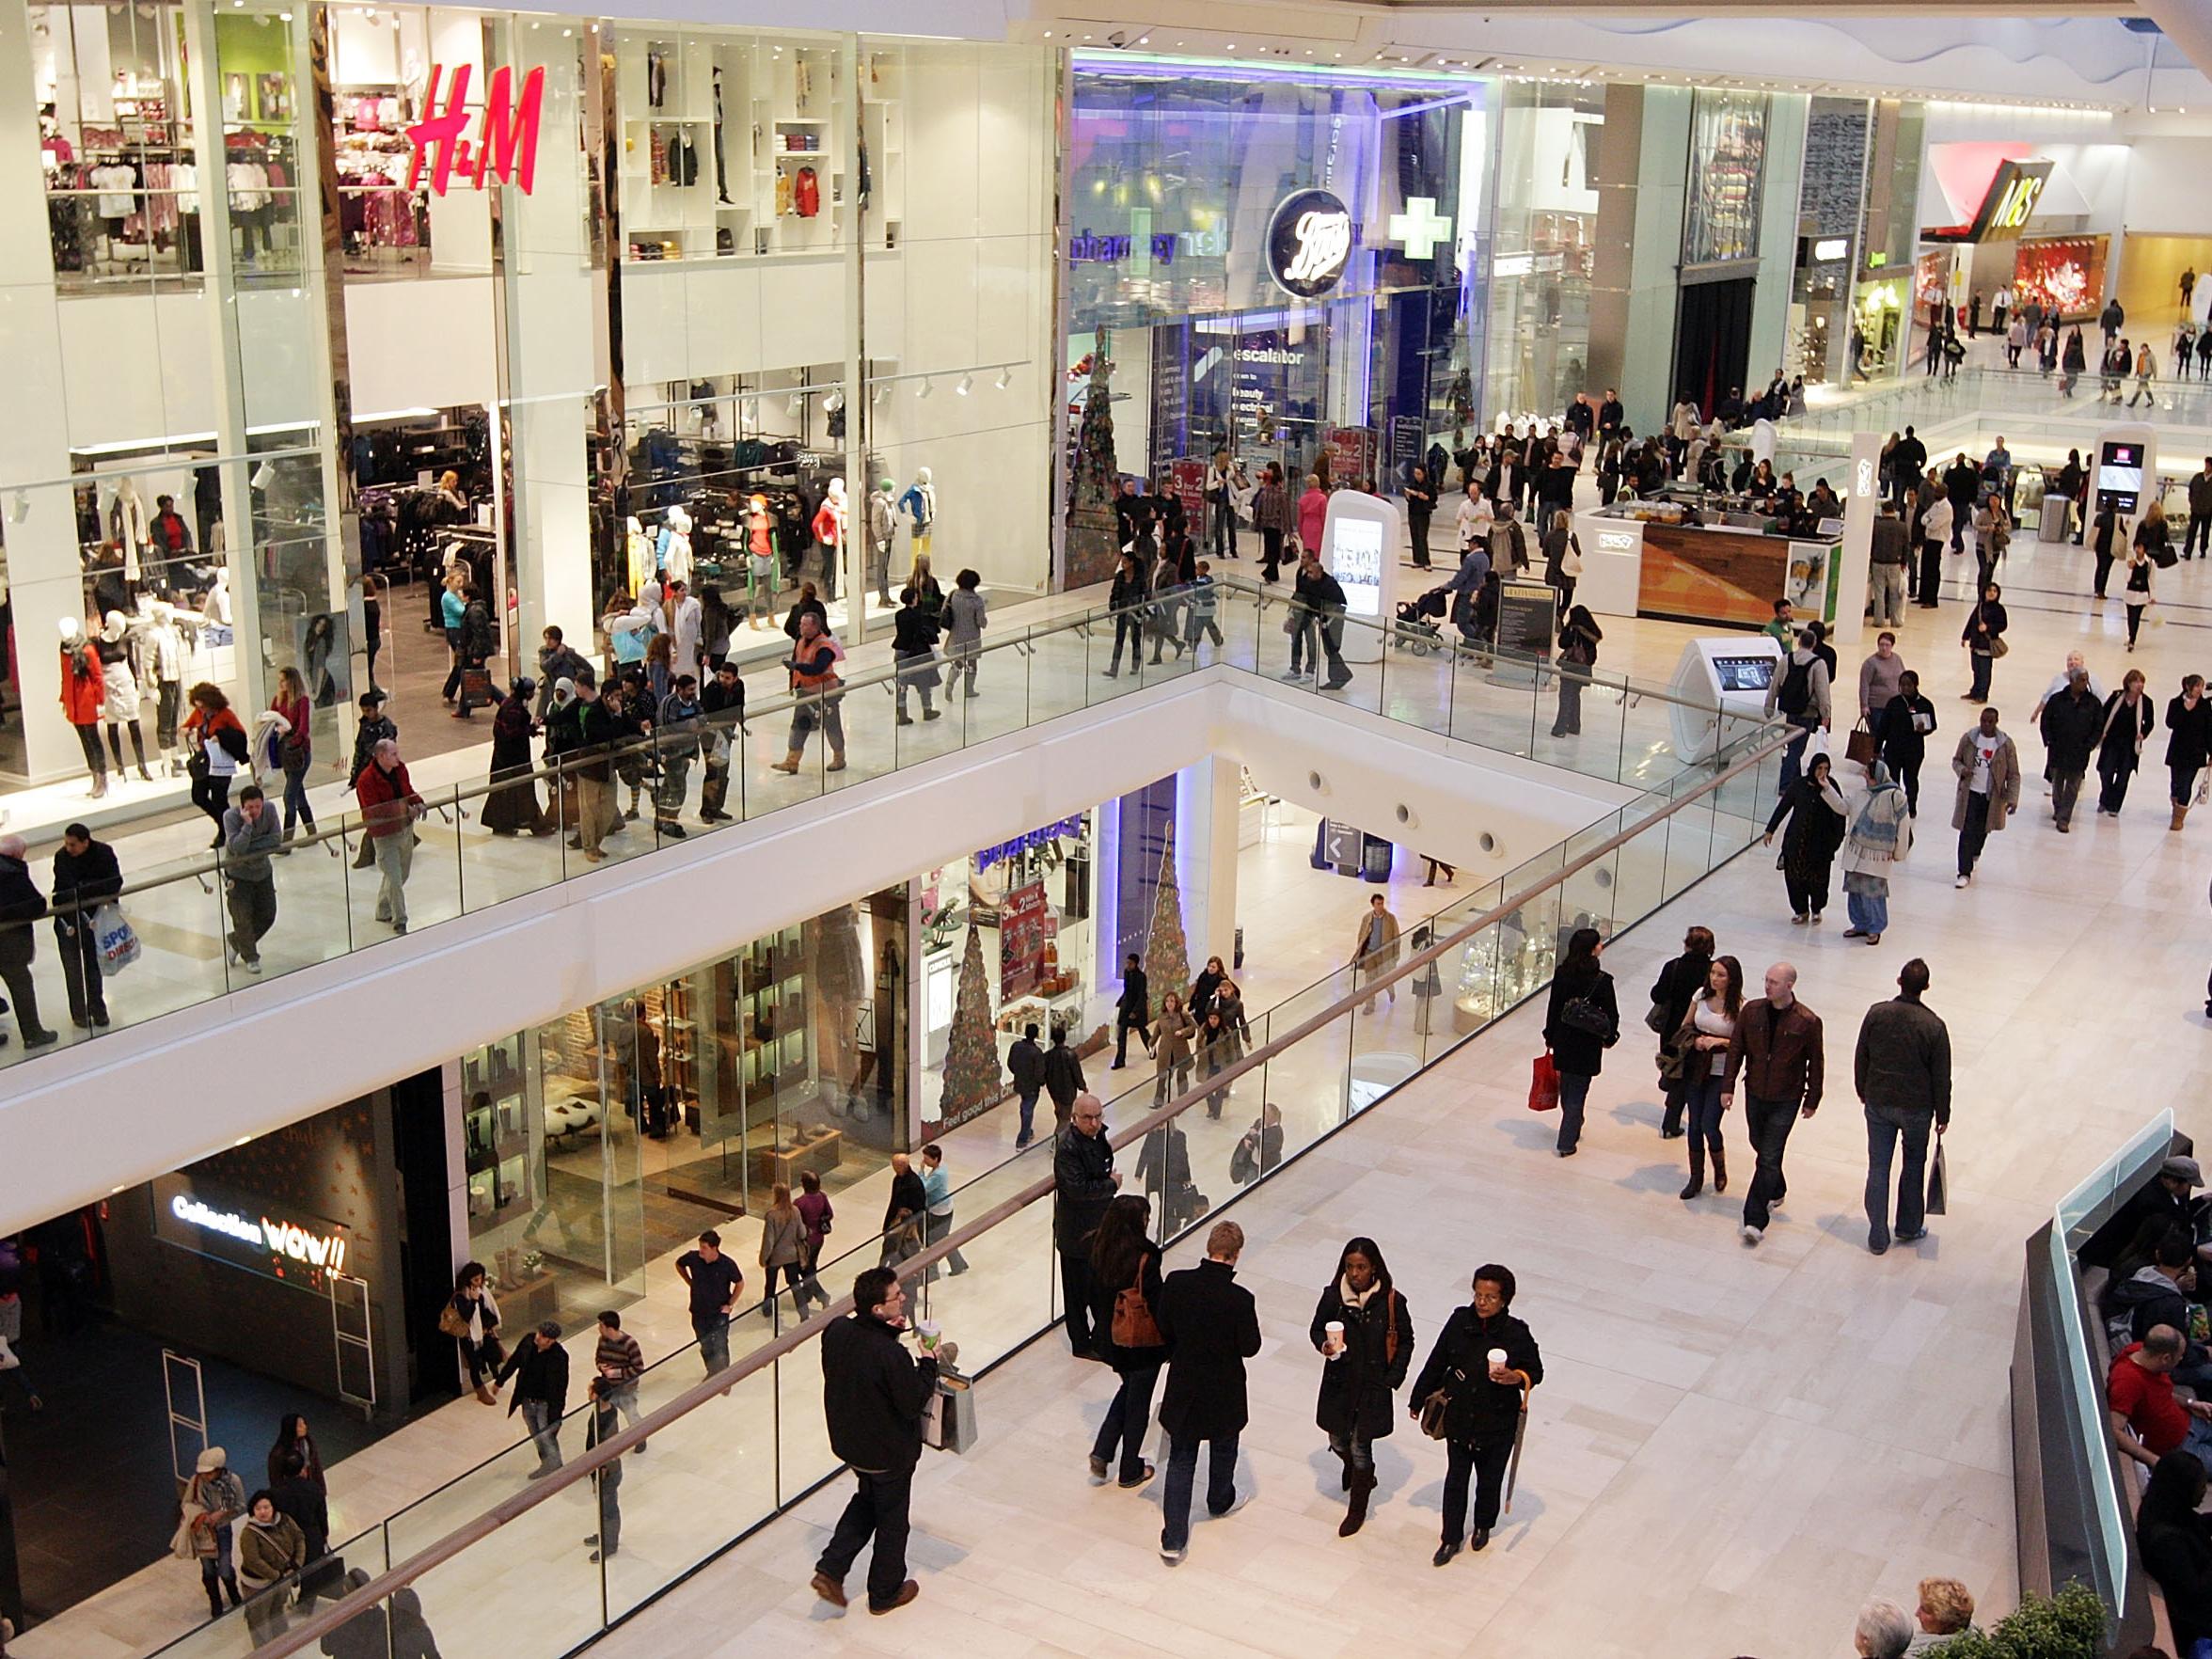 Crowds of shoppers in the Westfield shopping centre in west London